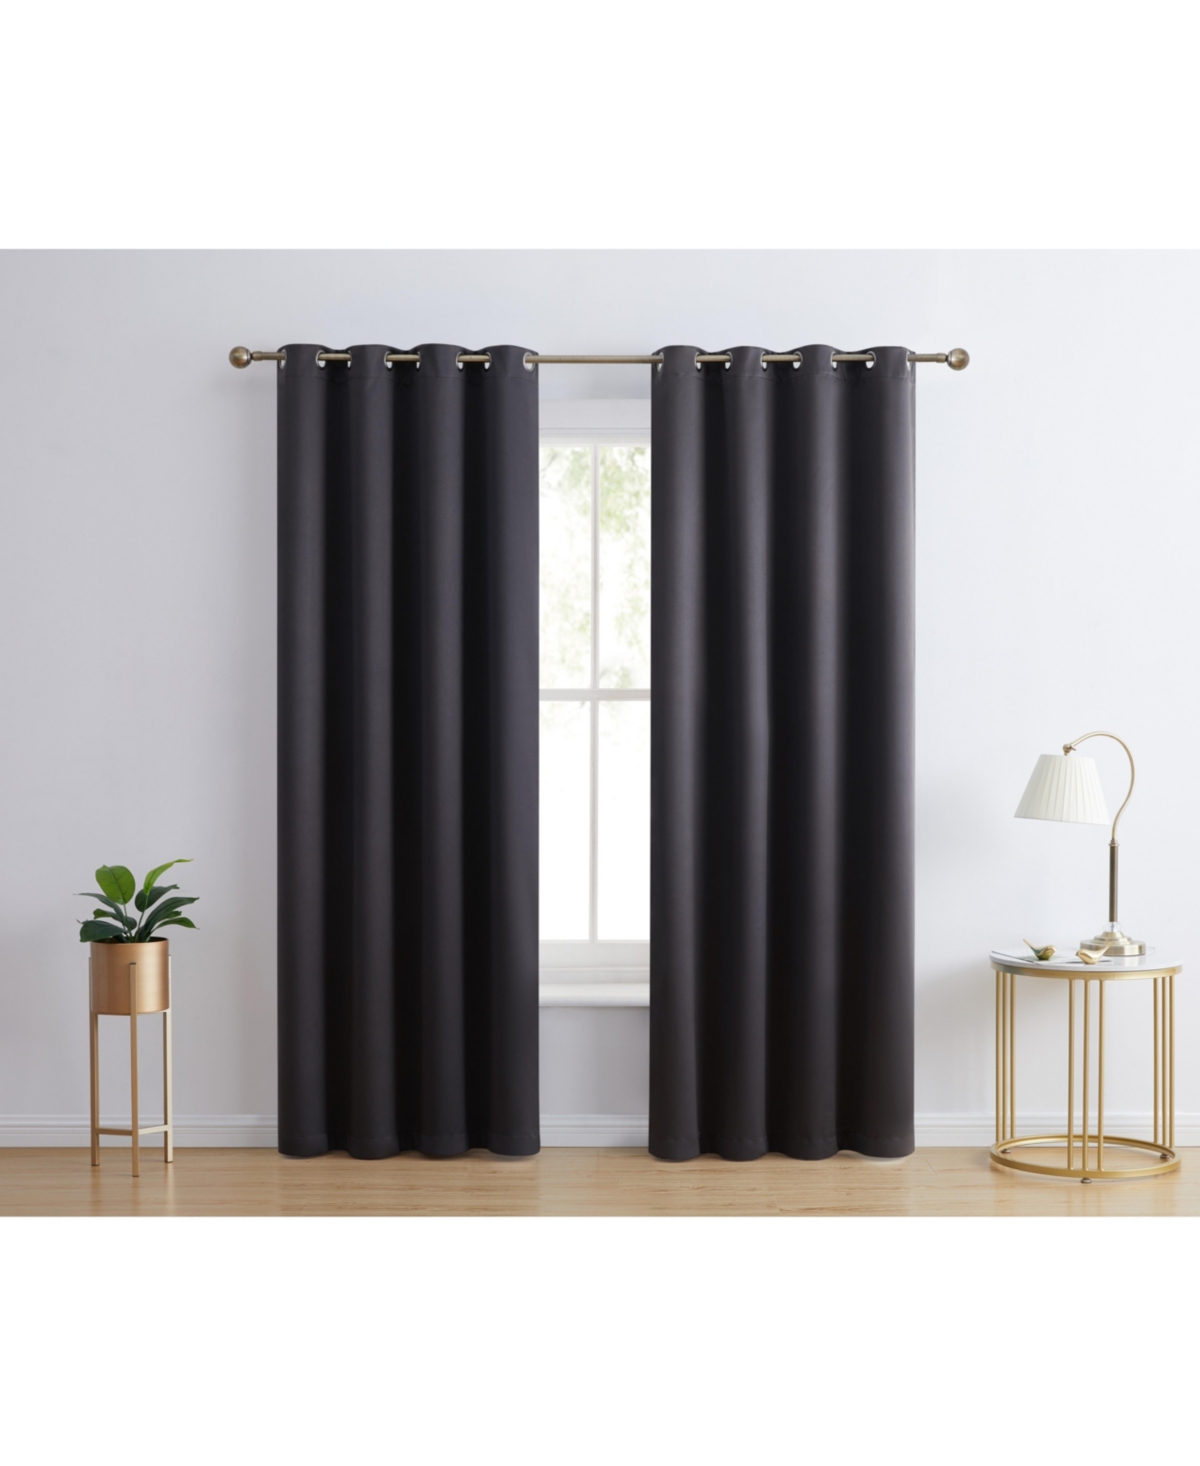 Laurance Full Shaded Blackout Curtains - Thermal Insulation Light Blocking Home Theater Grommet Window Drapery Basement Curtains, Set of 2 - Je